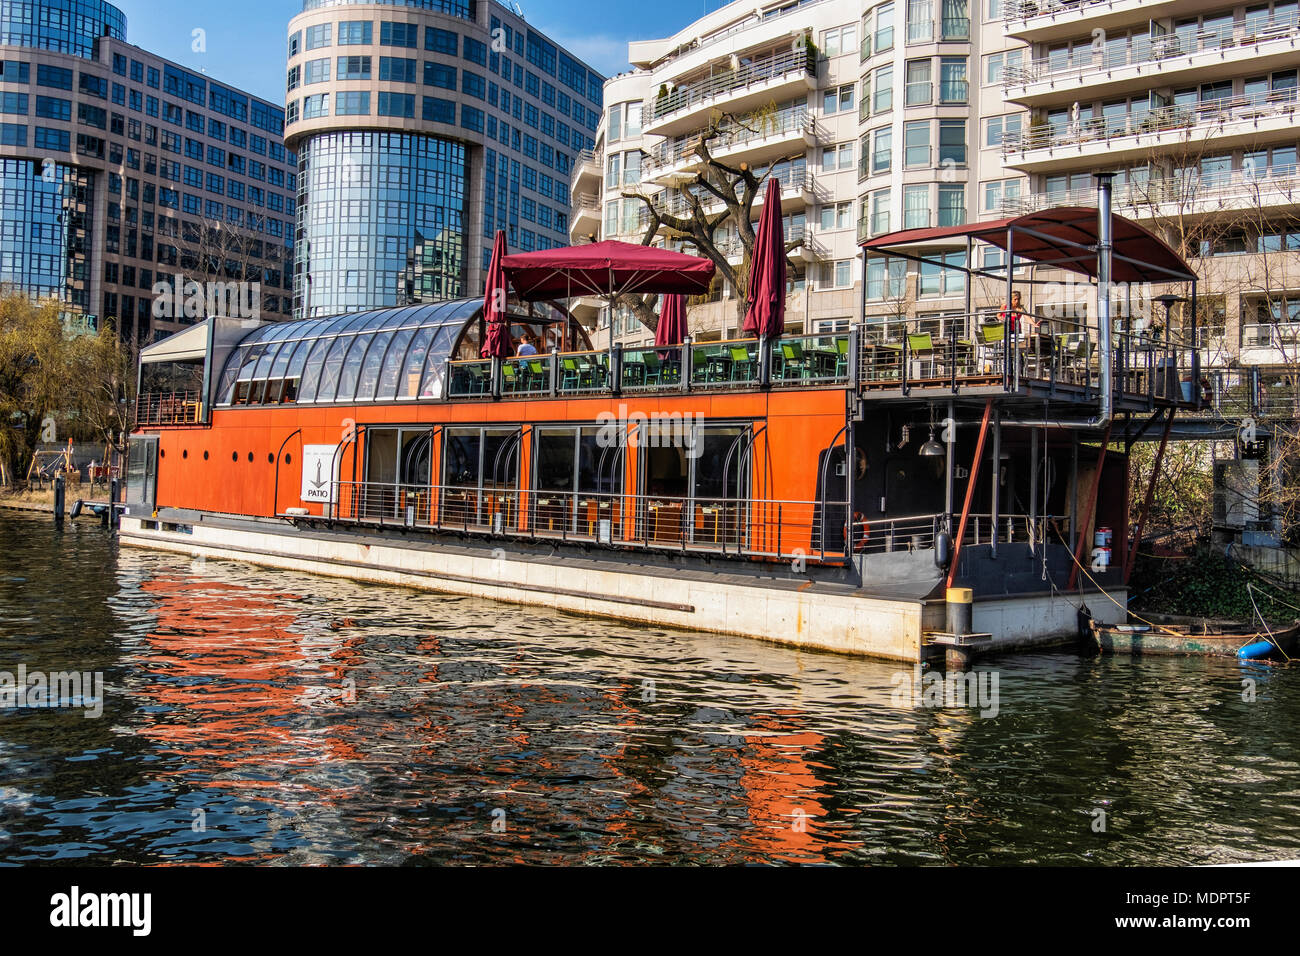 Berlin. Mitte, Patio restaurant. Floating boat restaurant on water of river Spree Stock Photo